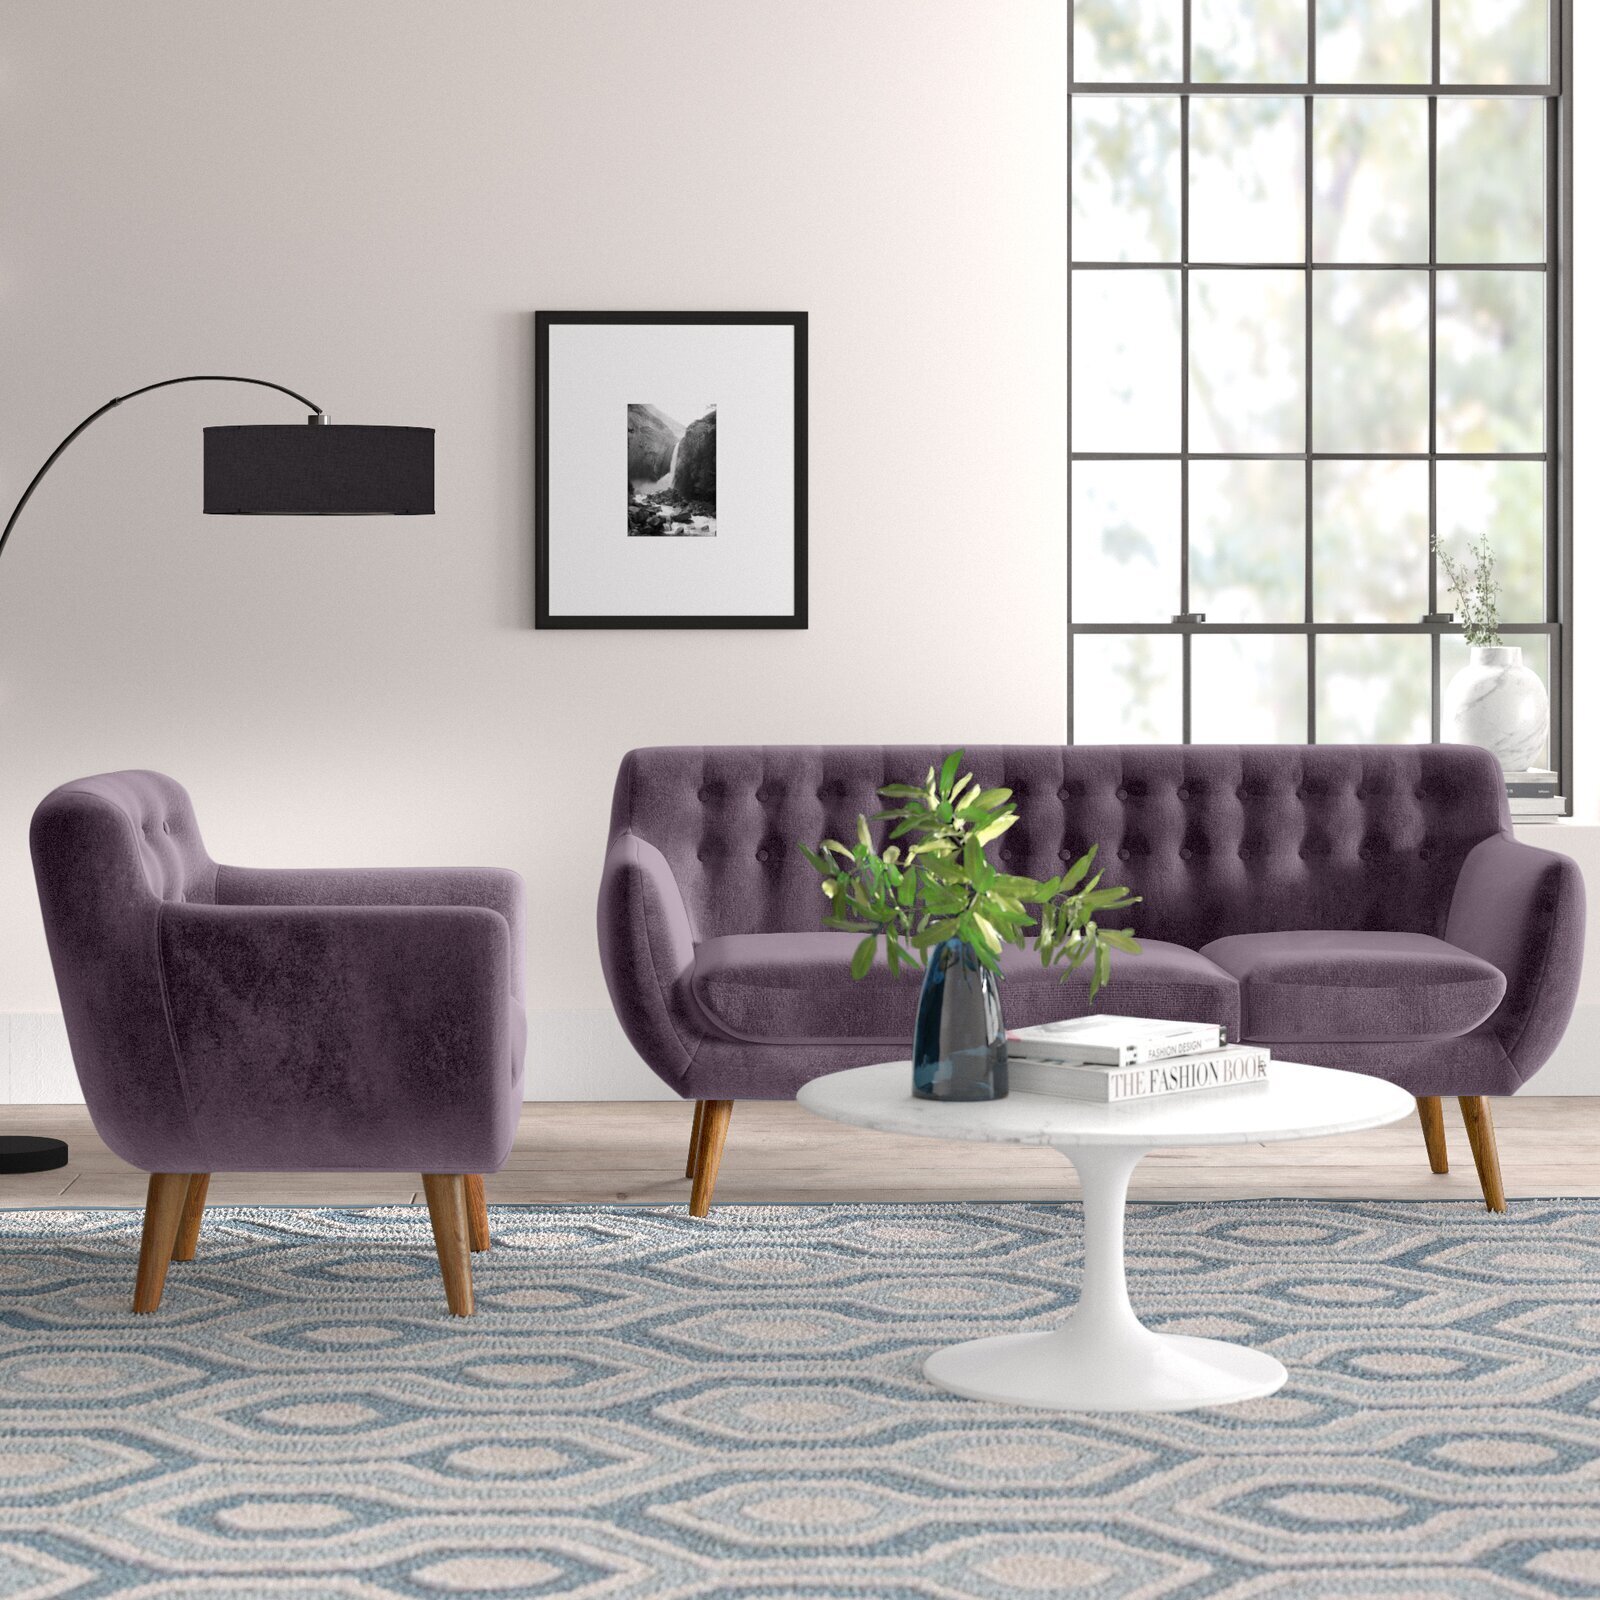 Purple living room set with a sofa and chair